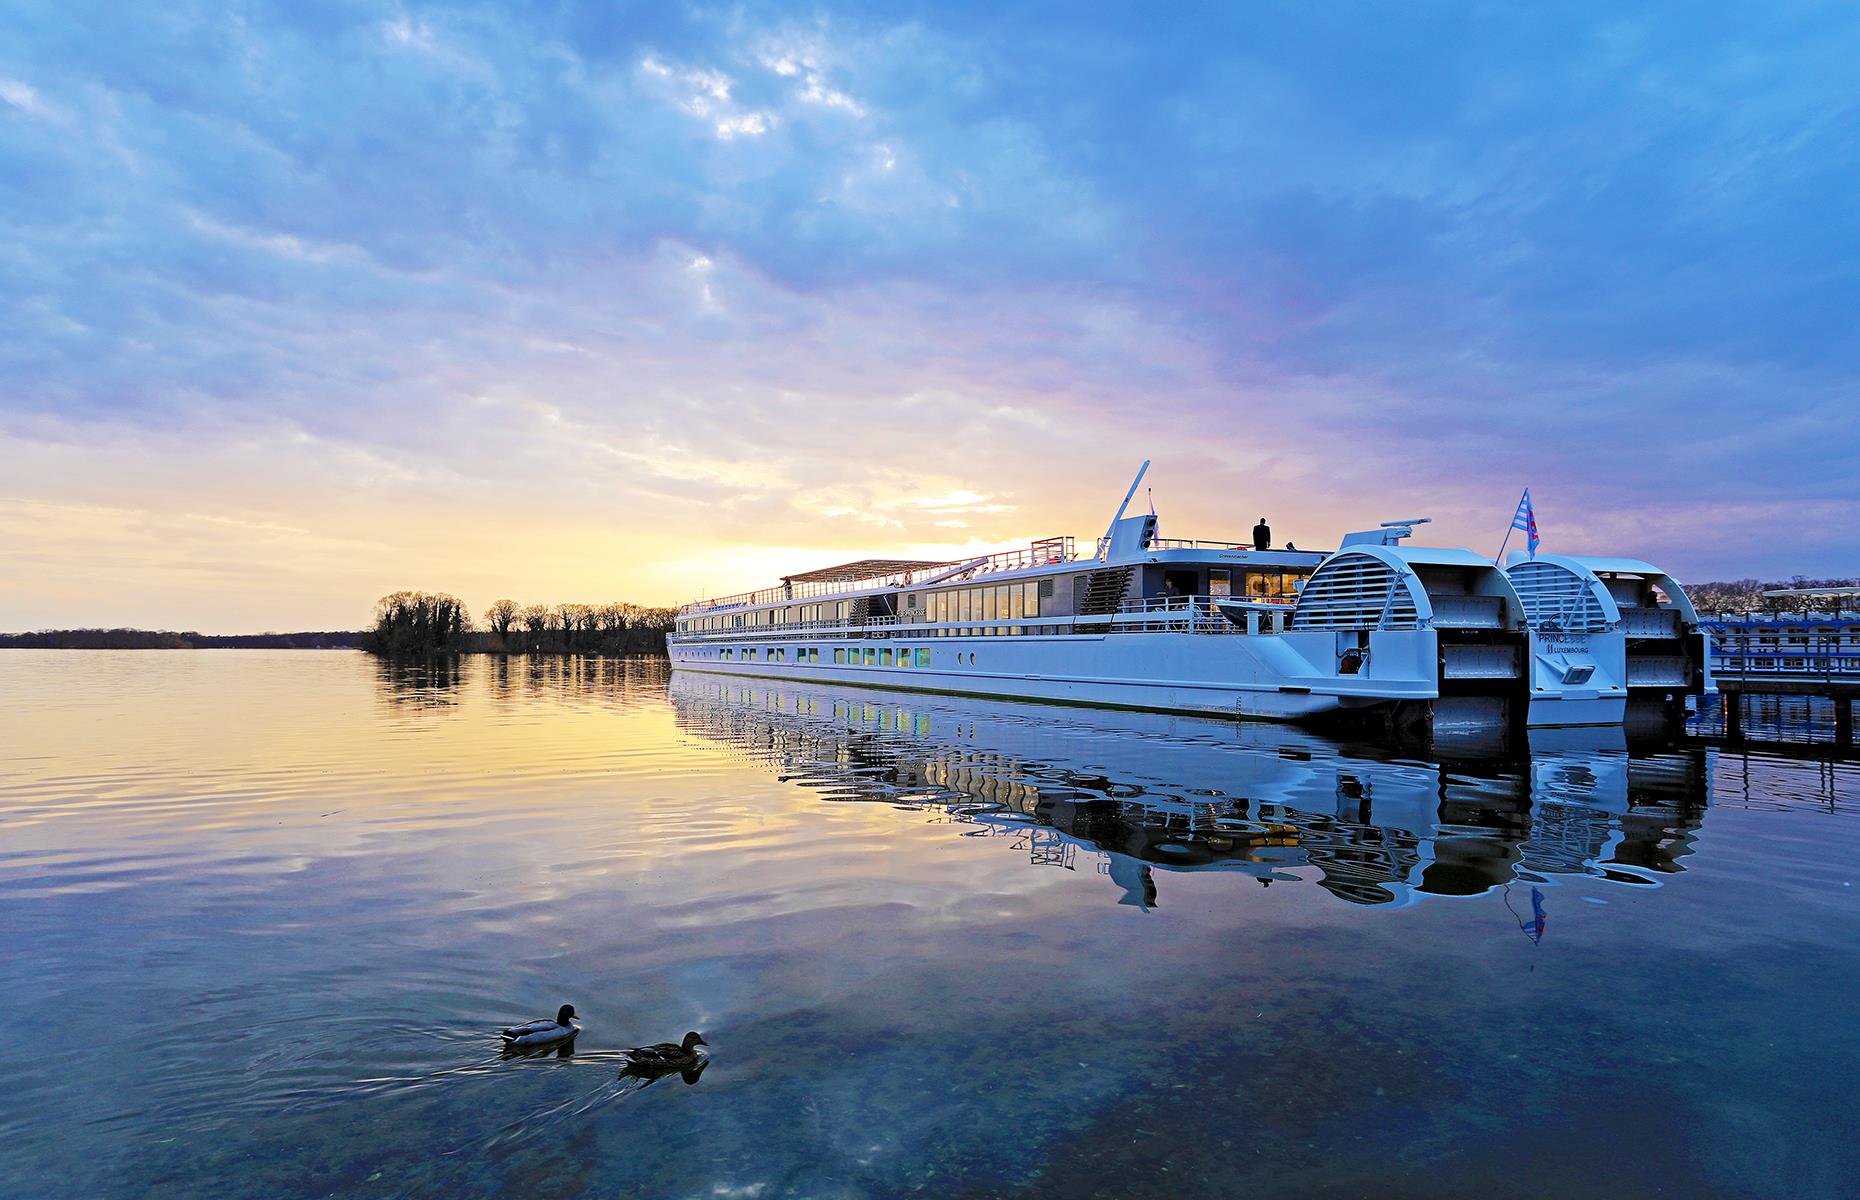 <p>Paddlewheel ships aren’t just found on US rivers. <a href="https://www.croisieurope.co.uk">CroisiEurope</a> is the only cruise line to run paddlewheel cruises on two European rivers – the Elbe and the Loire. Other boats are few and far between – these rivers are notoriously shallow but the latest paddlewheel technology means CroisiEurope’s boats can sail these stretches of water year-round.</p>